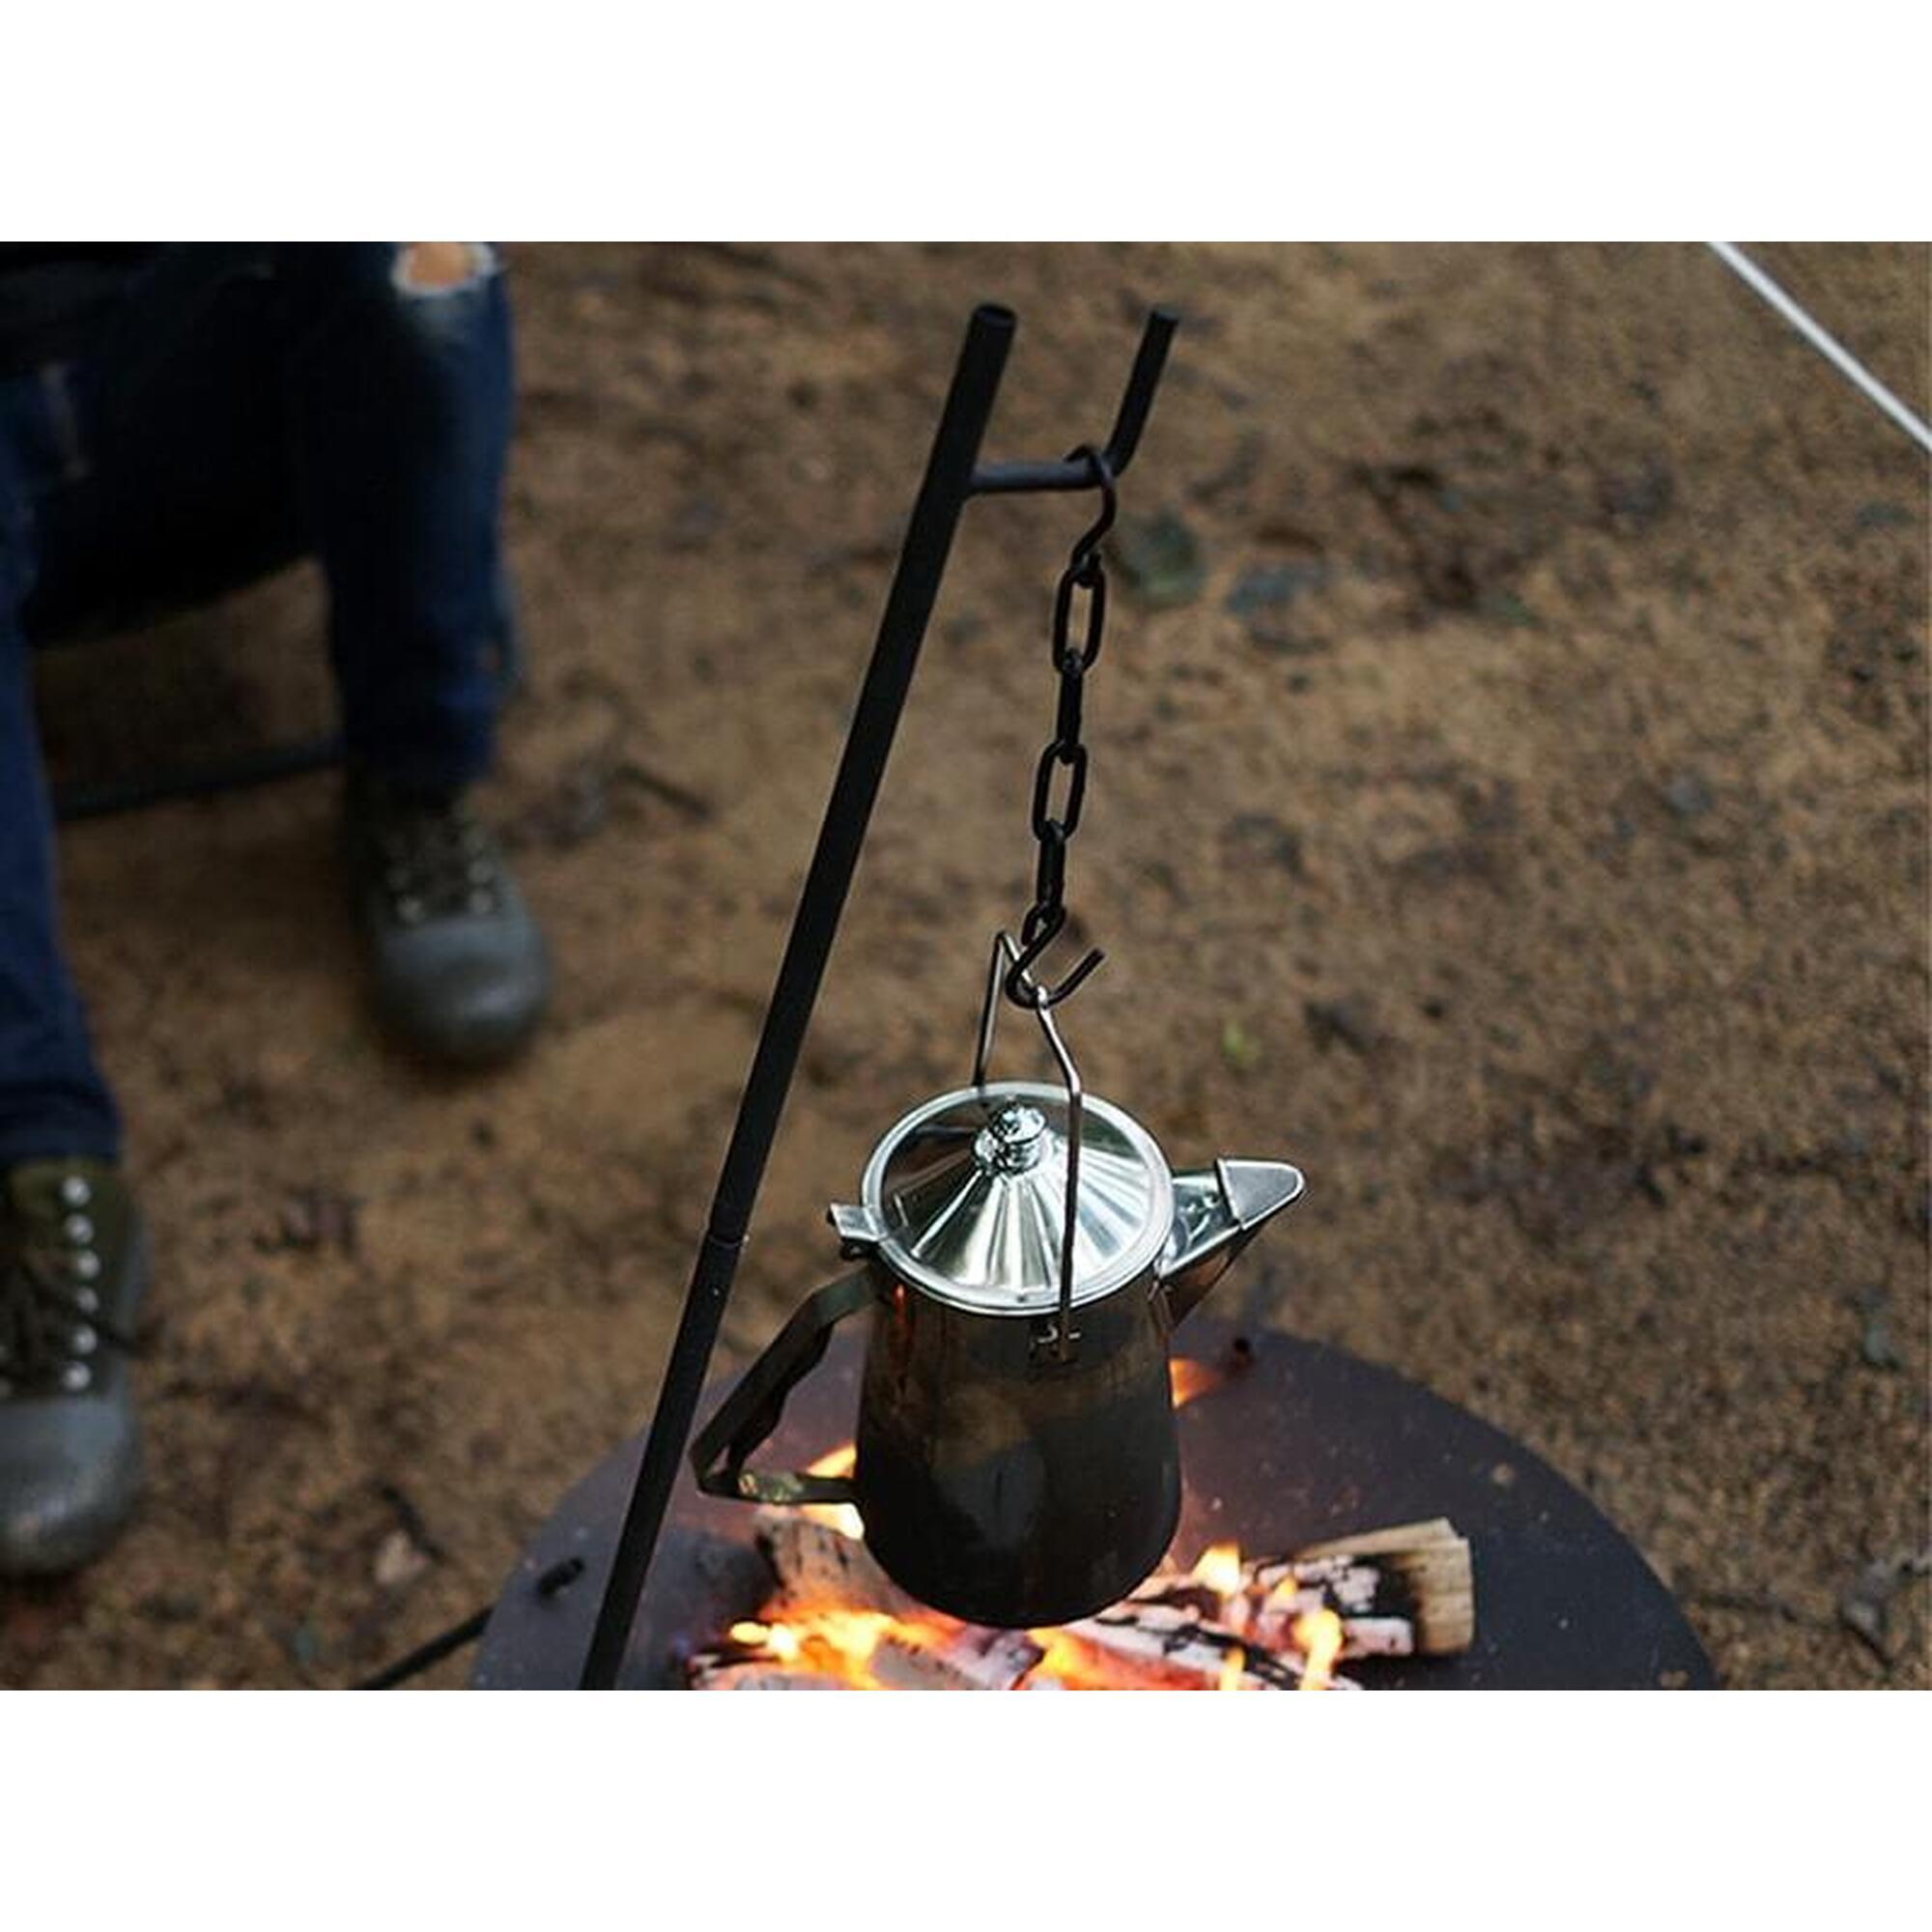 BEETLE FIRE PIT Camping Stove - BLK